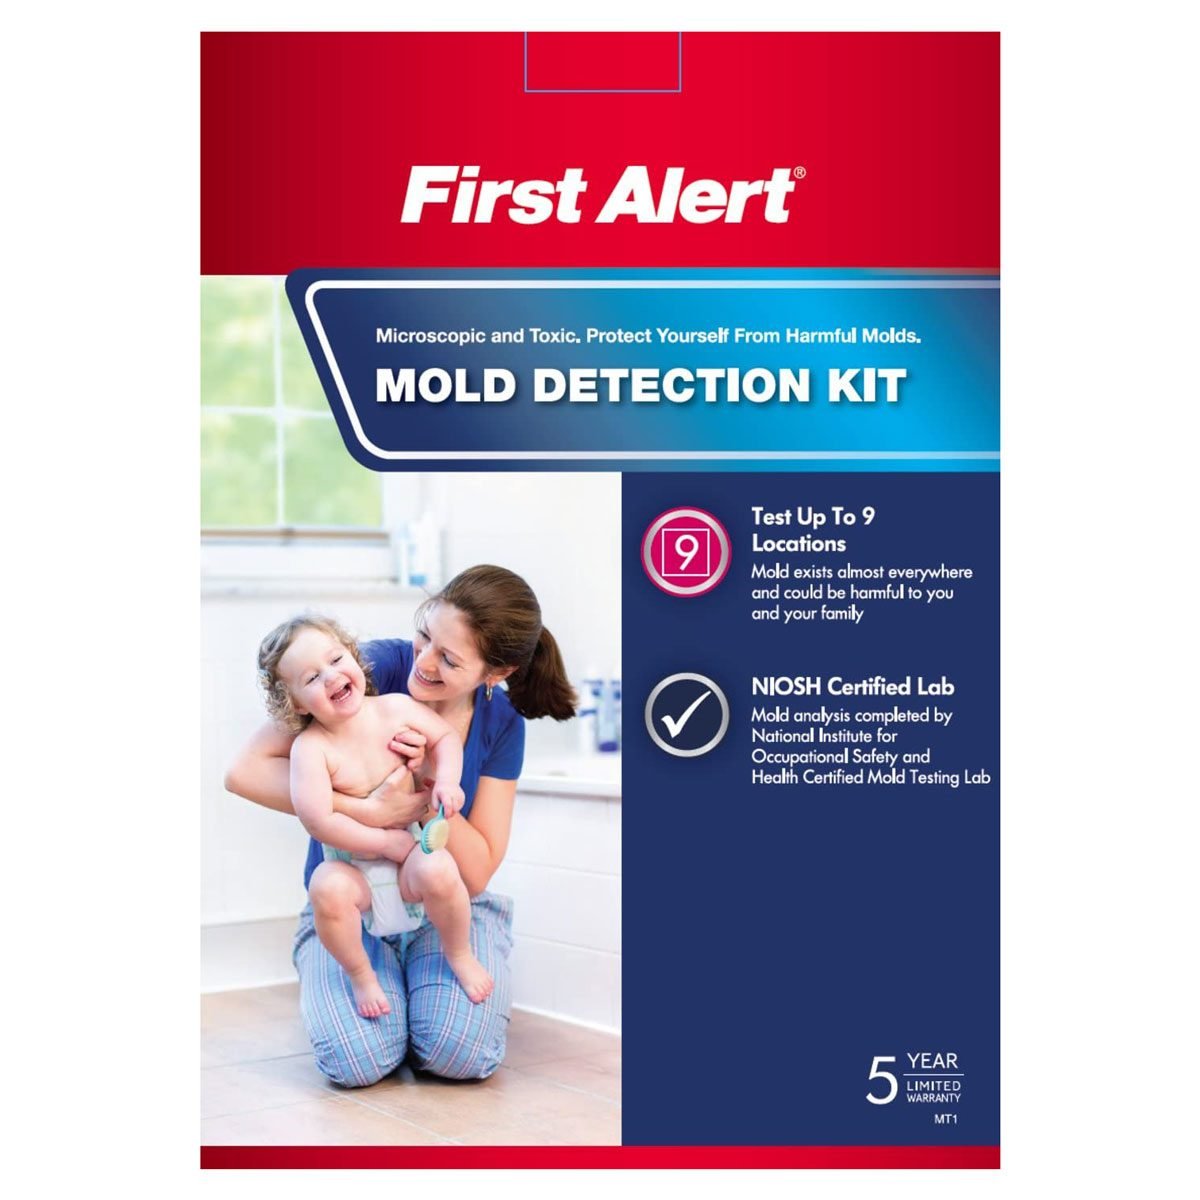 Mold Armor Indoor Mold Test Kit - Detects Mold Presence, Quick Results in  48 Hours, Easy and Safe to Use